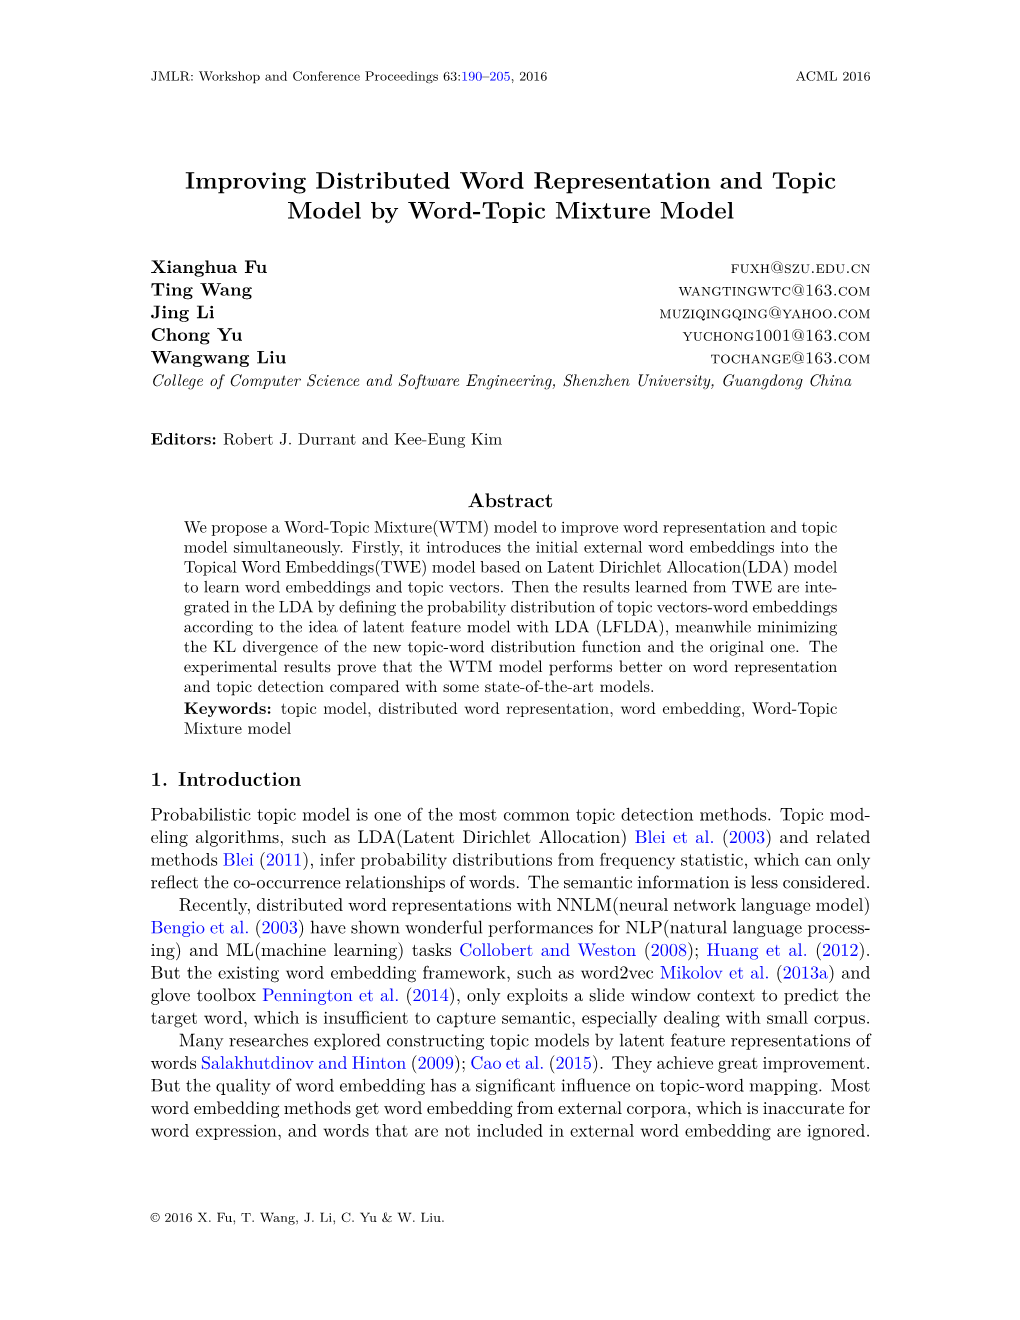 Improving Distributed Word Representation and Topic Model by Word-Topic Mixture Model